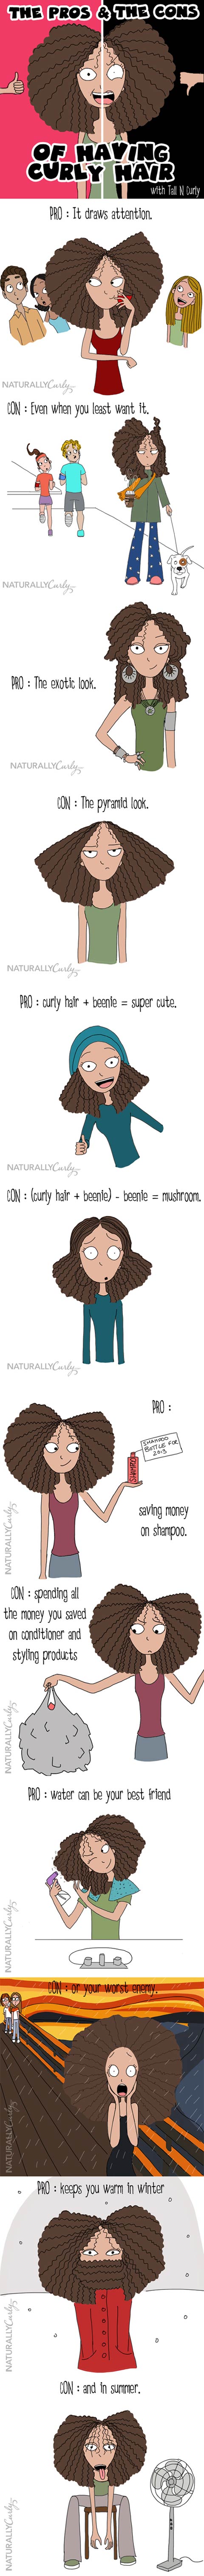 For all the curly hair girls...